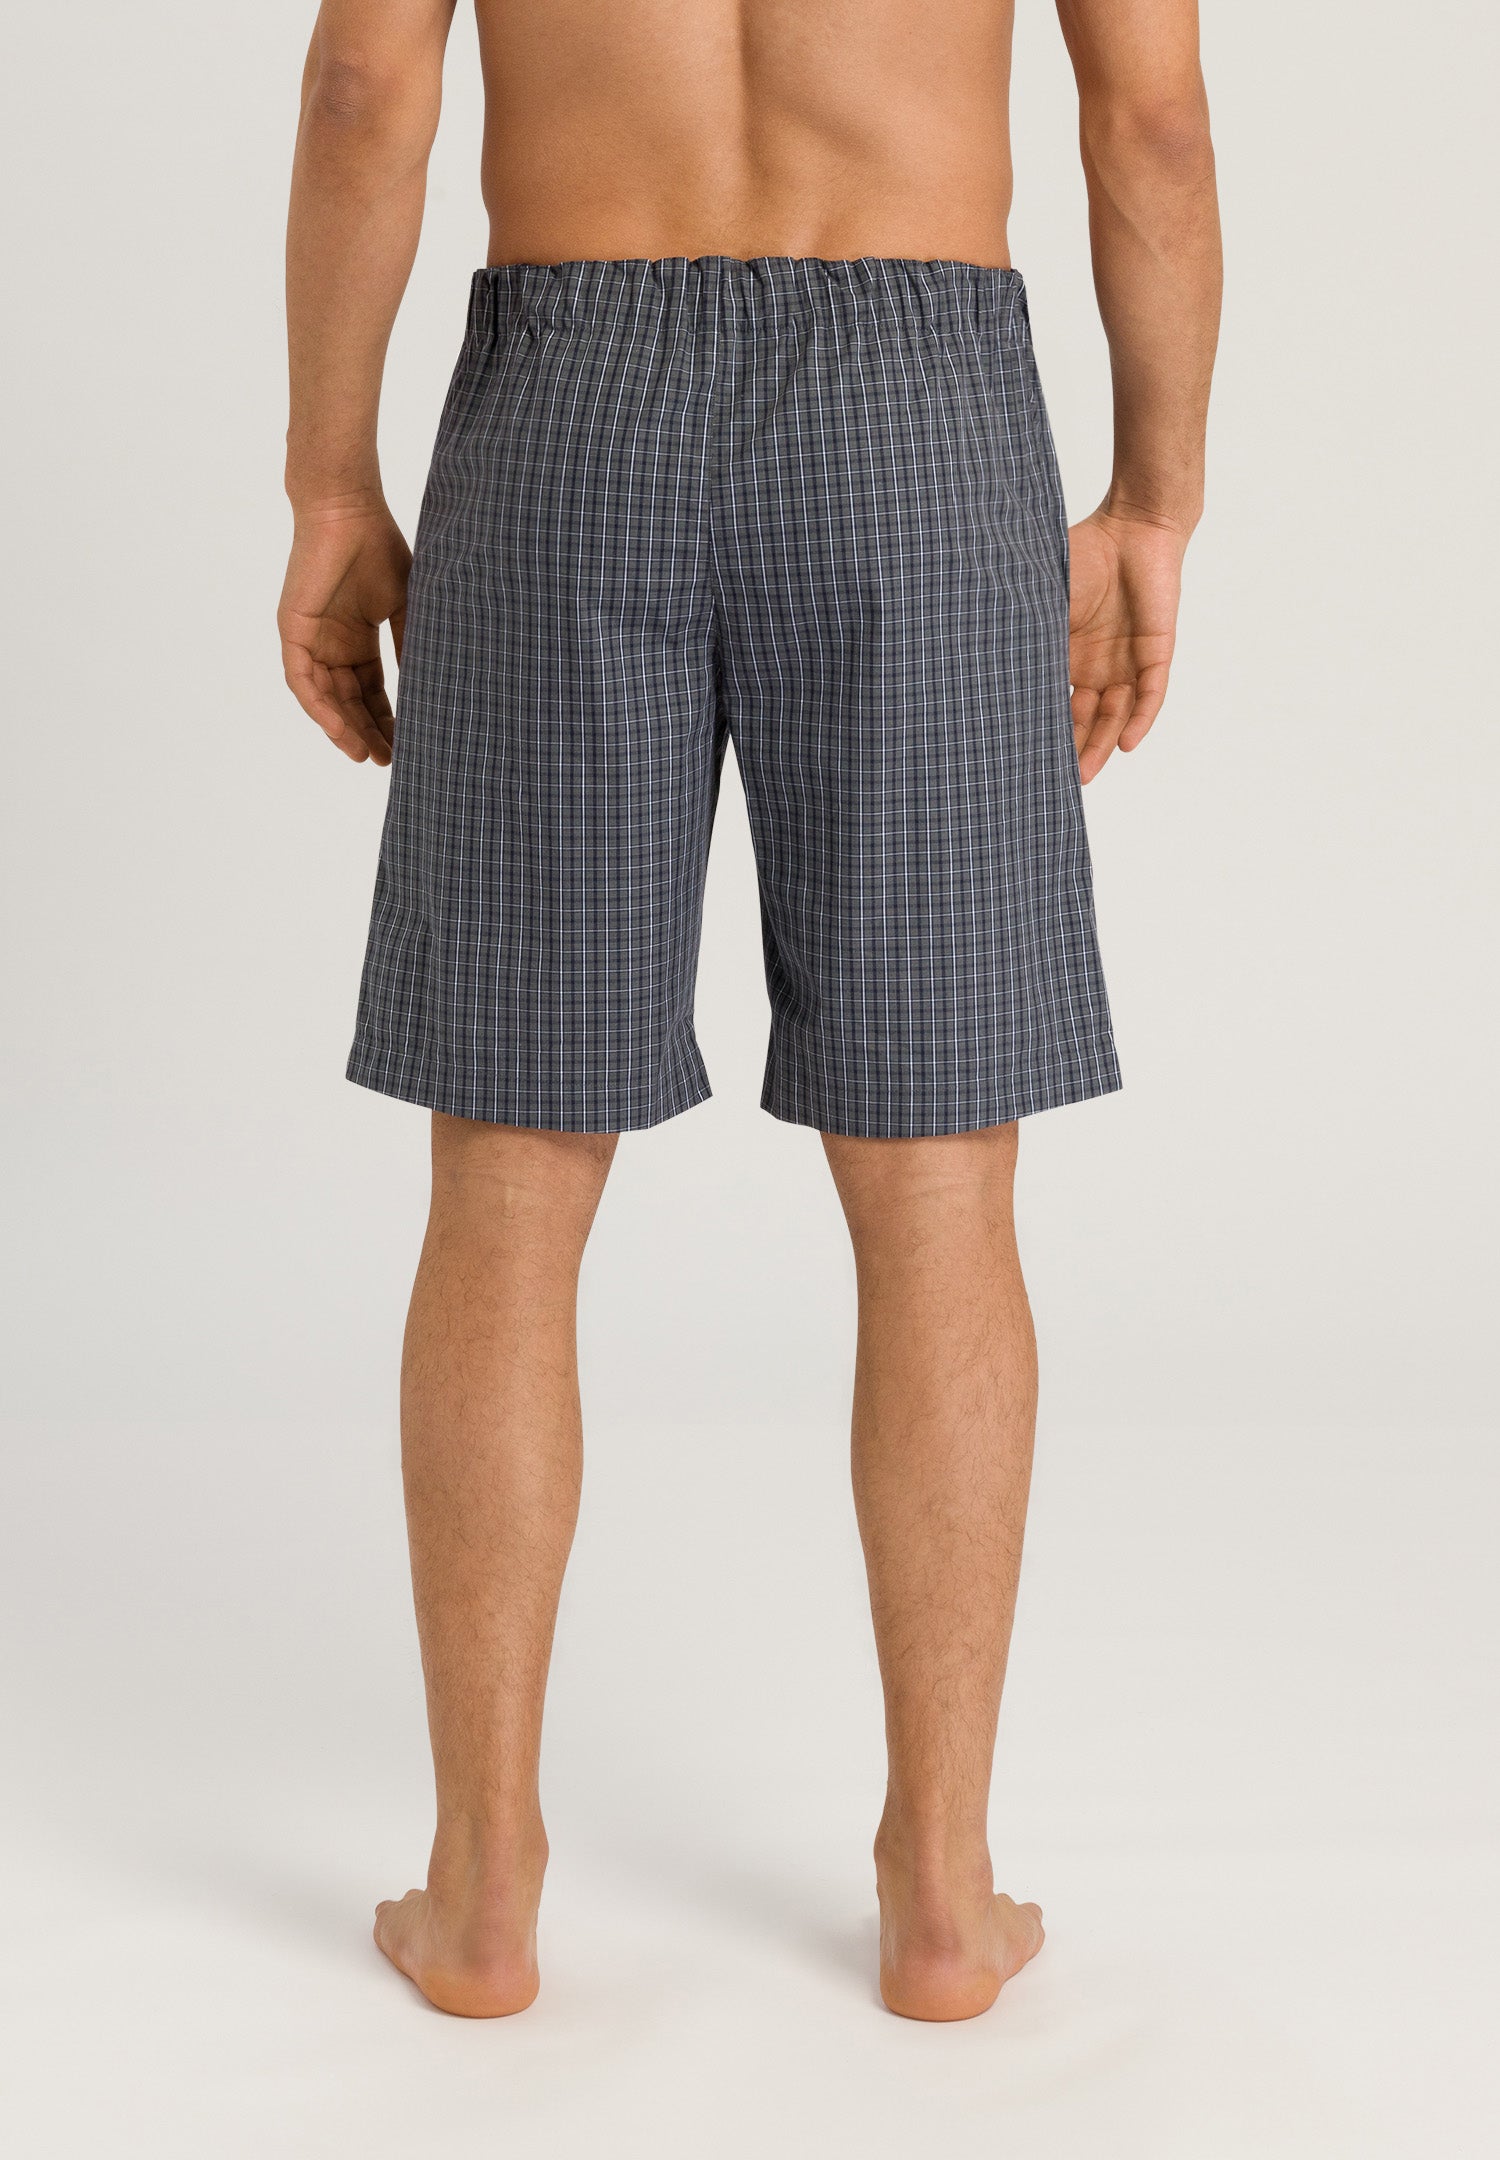 75433 Night And Day Short Woven Pant - 2385 Casual Check